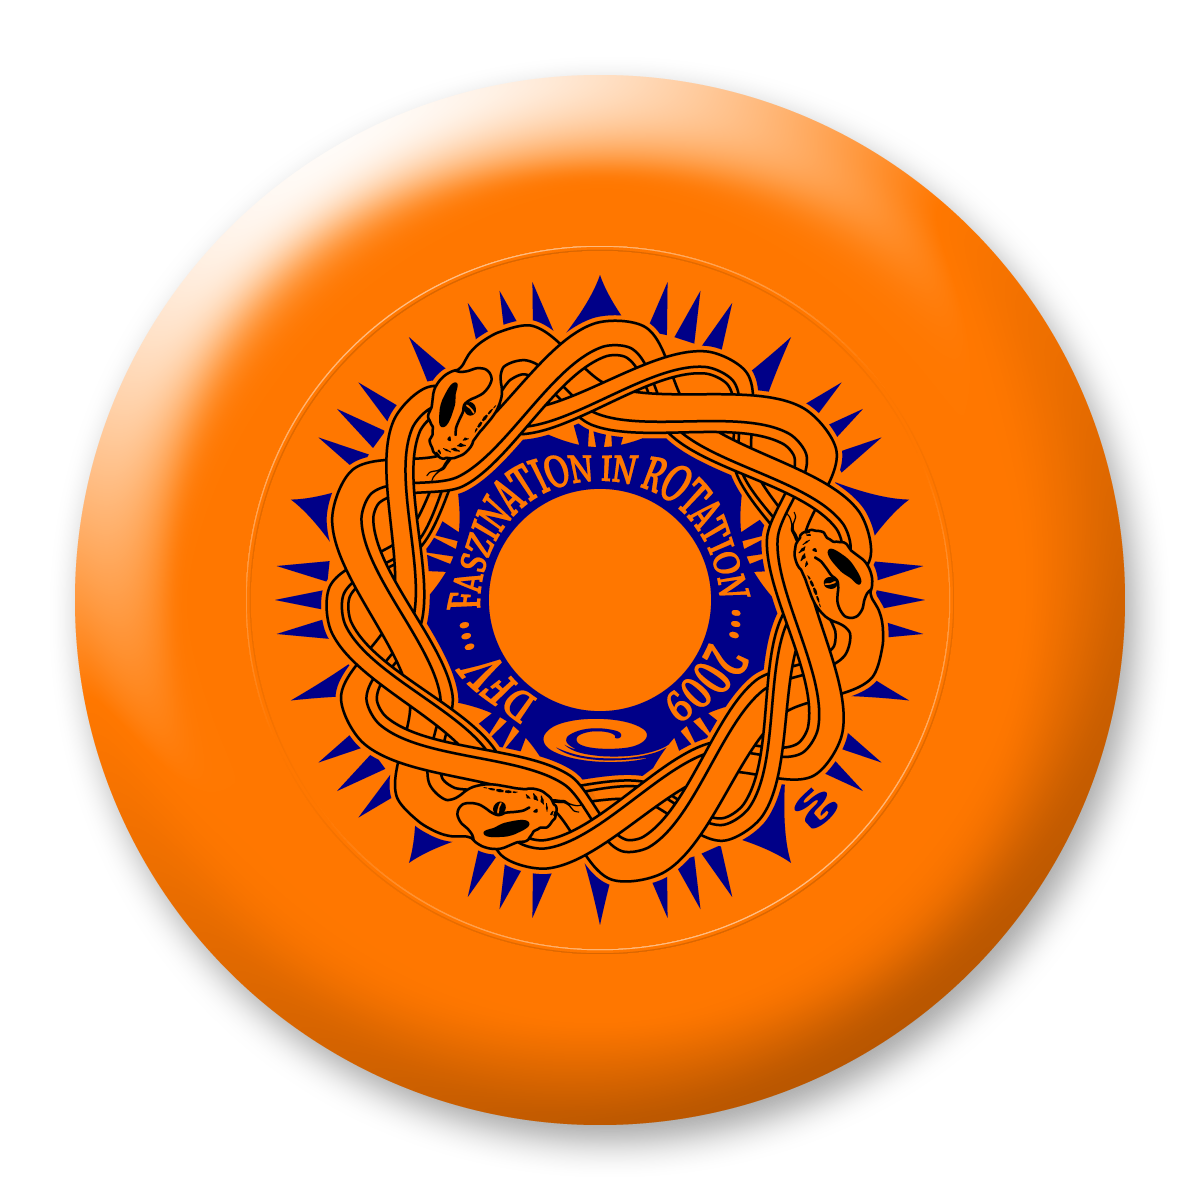 Frisbee PNG